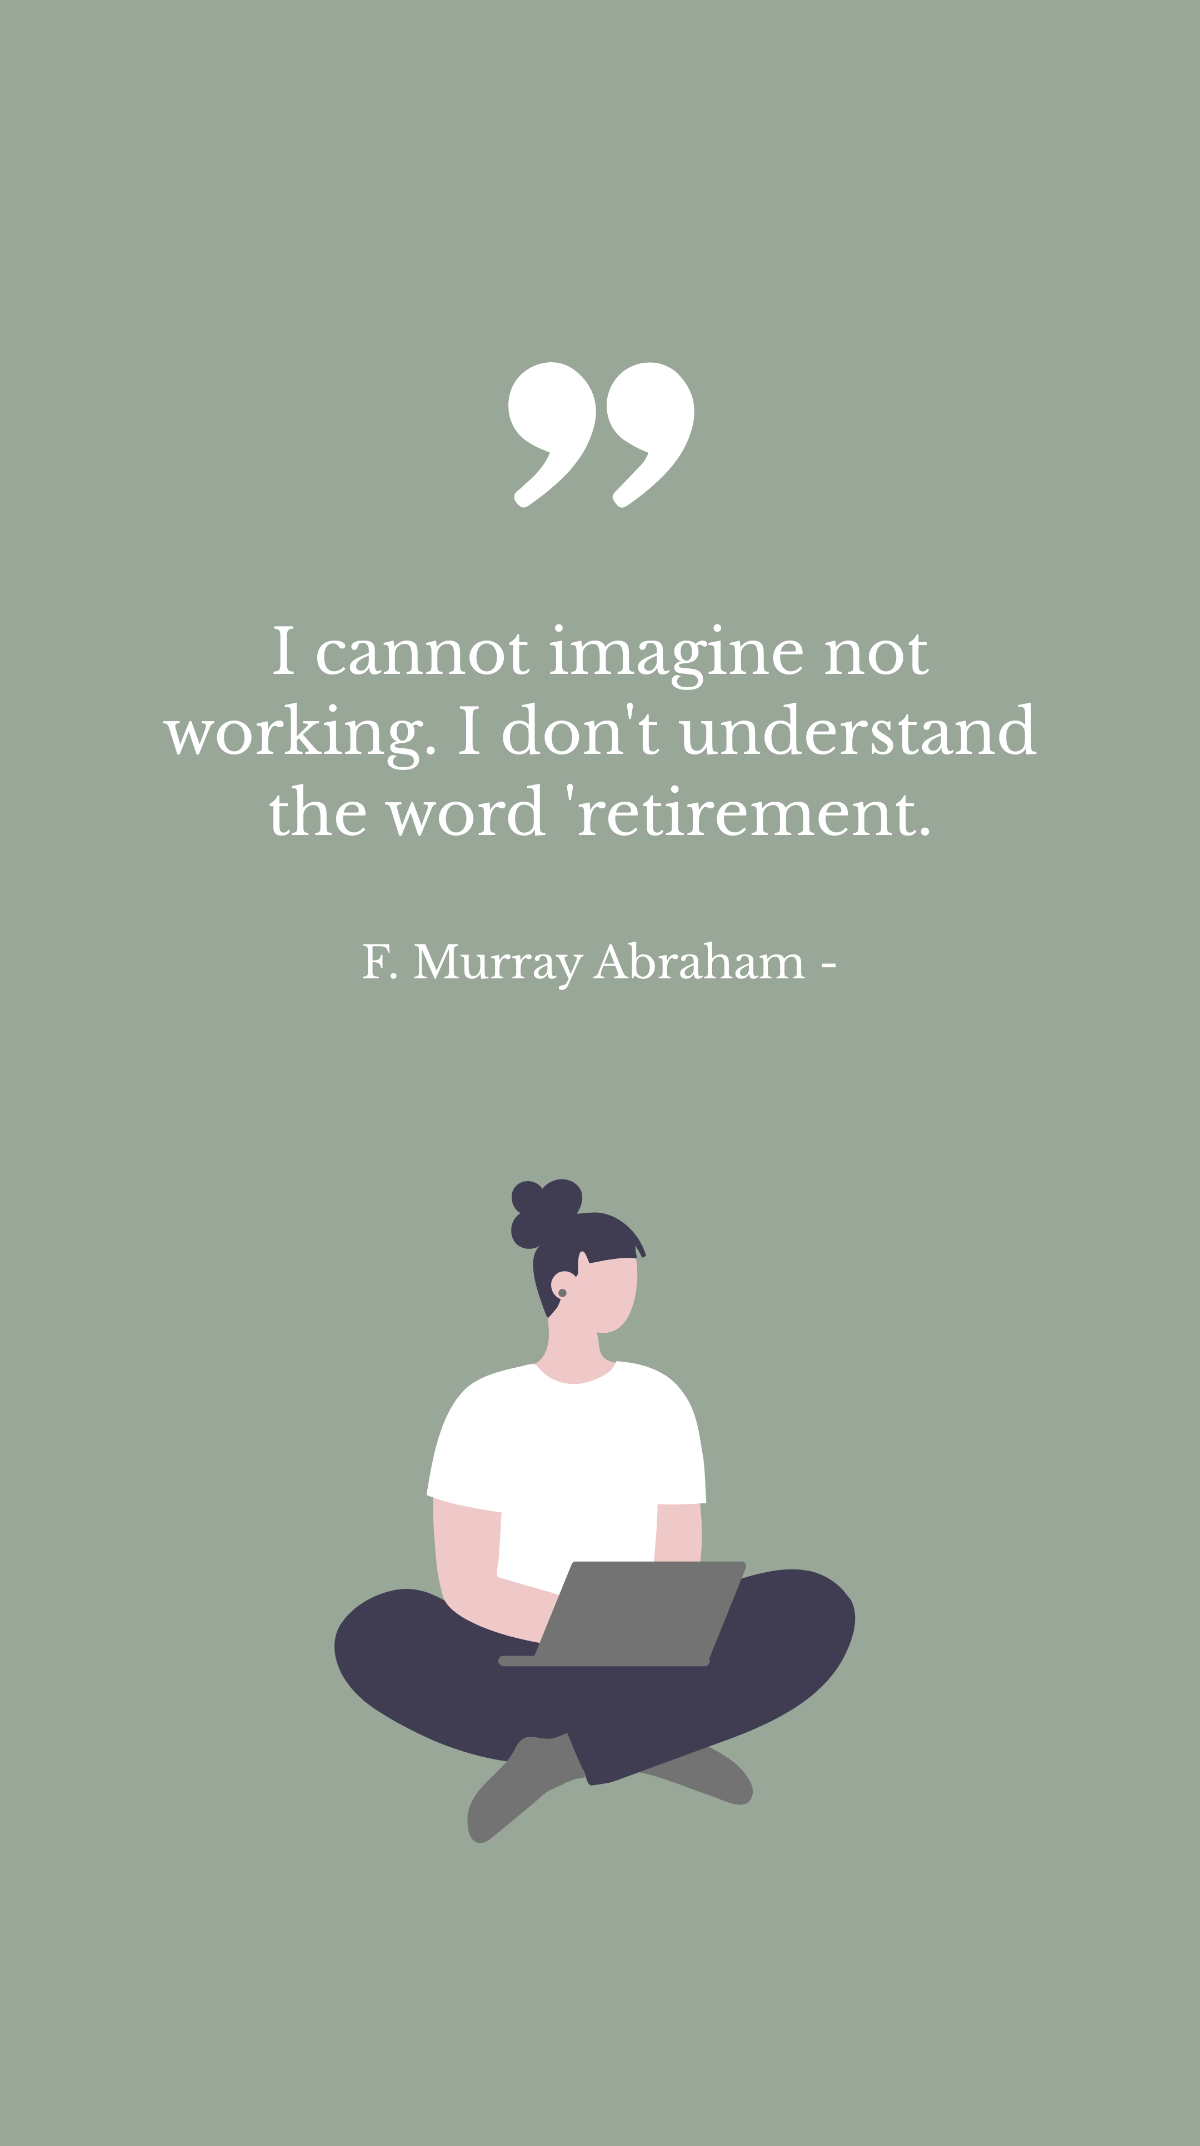 Free F. Murray Abraham - I cannot imagine not working. I don't understand the word 'retirement. Template